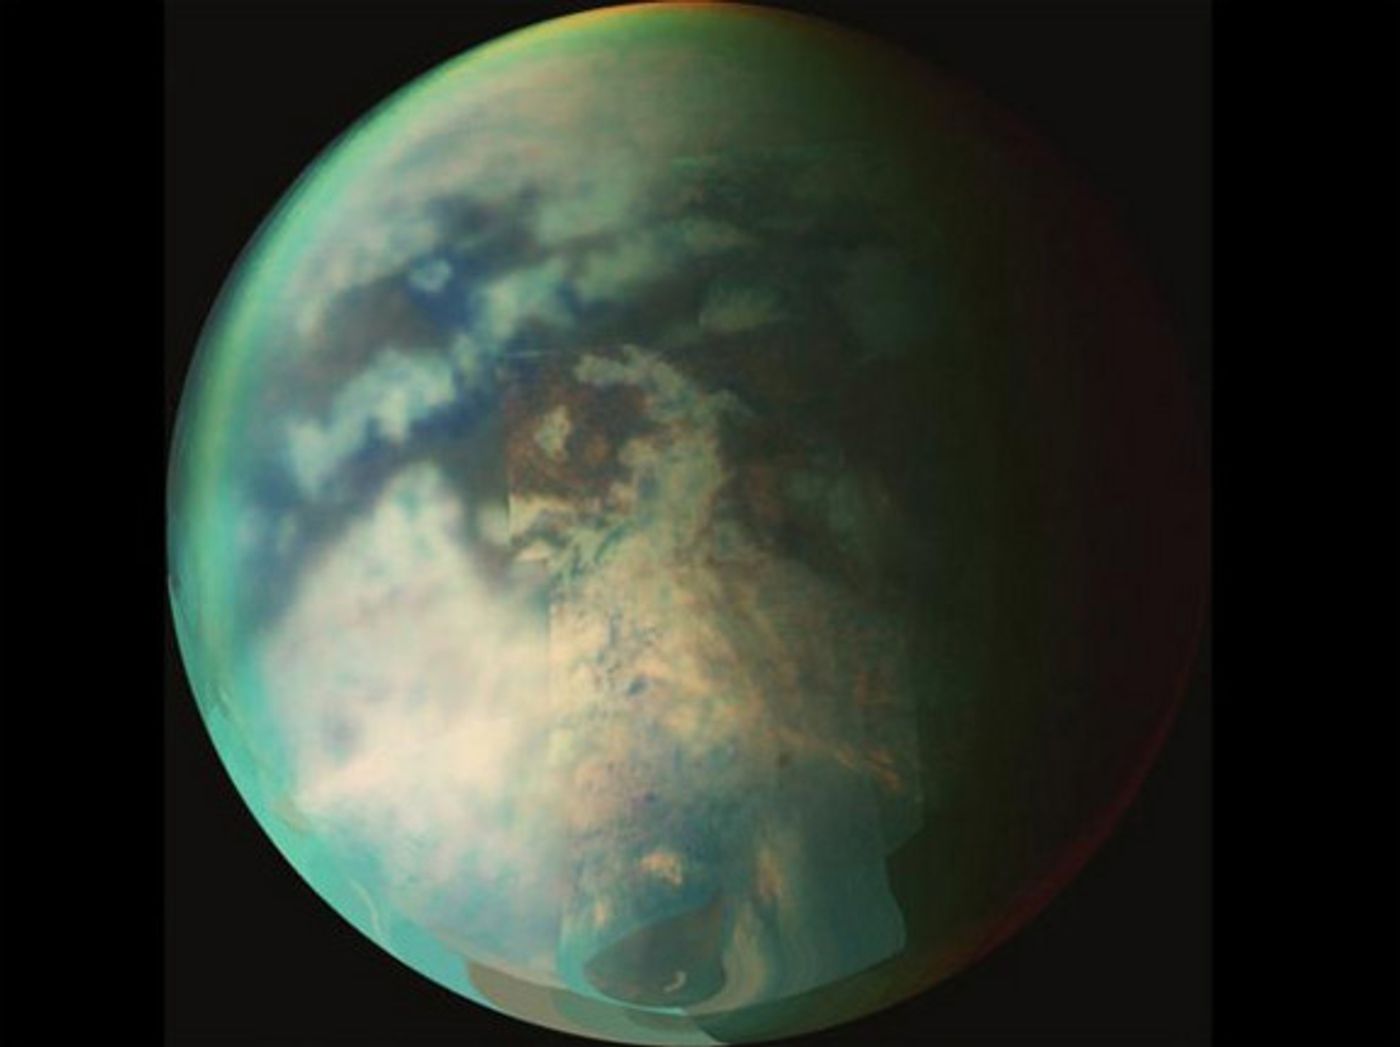 Titan is Saturn's largest moon, and it happens to be a lot like the Earth.